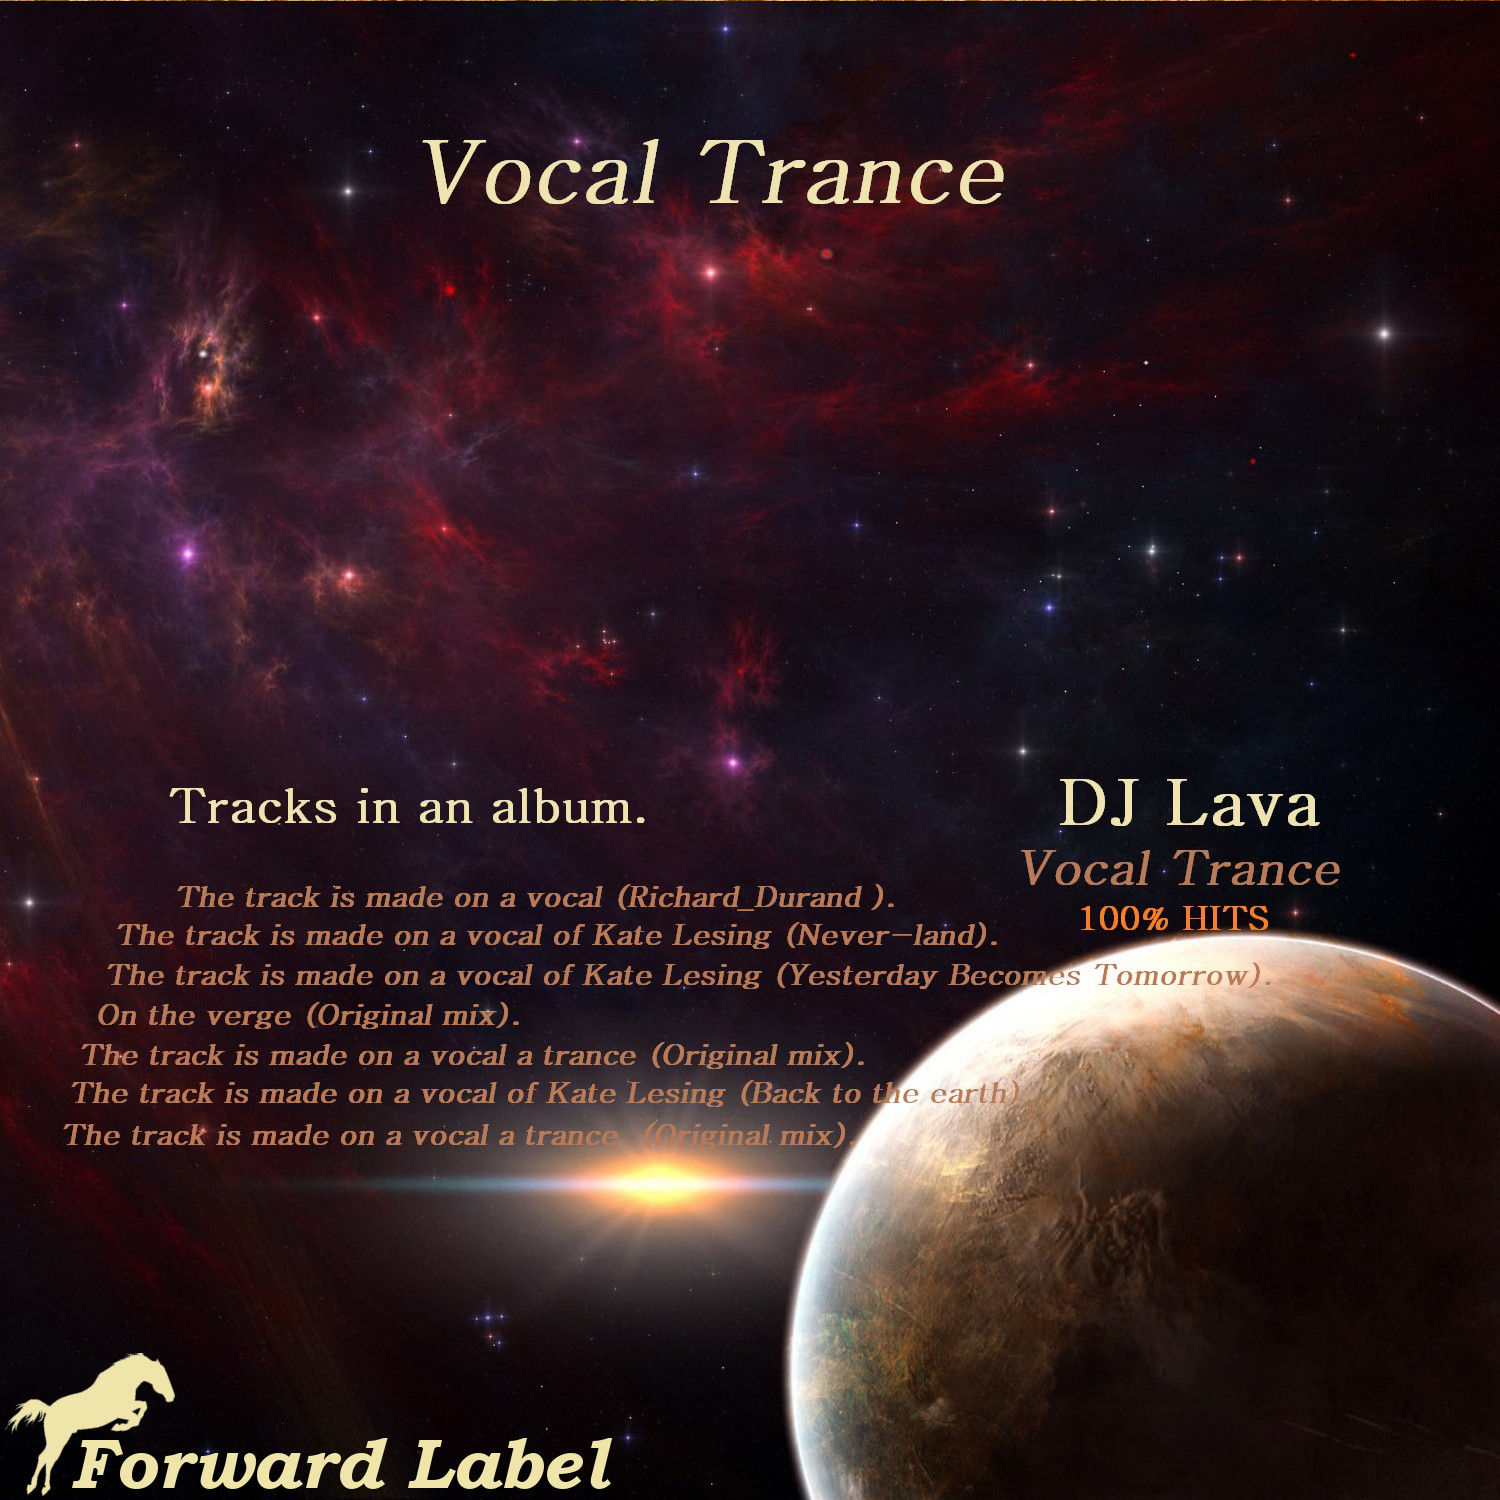 DJ Lava - The Track Is Made On a Vocal a Trance фото